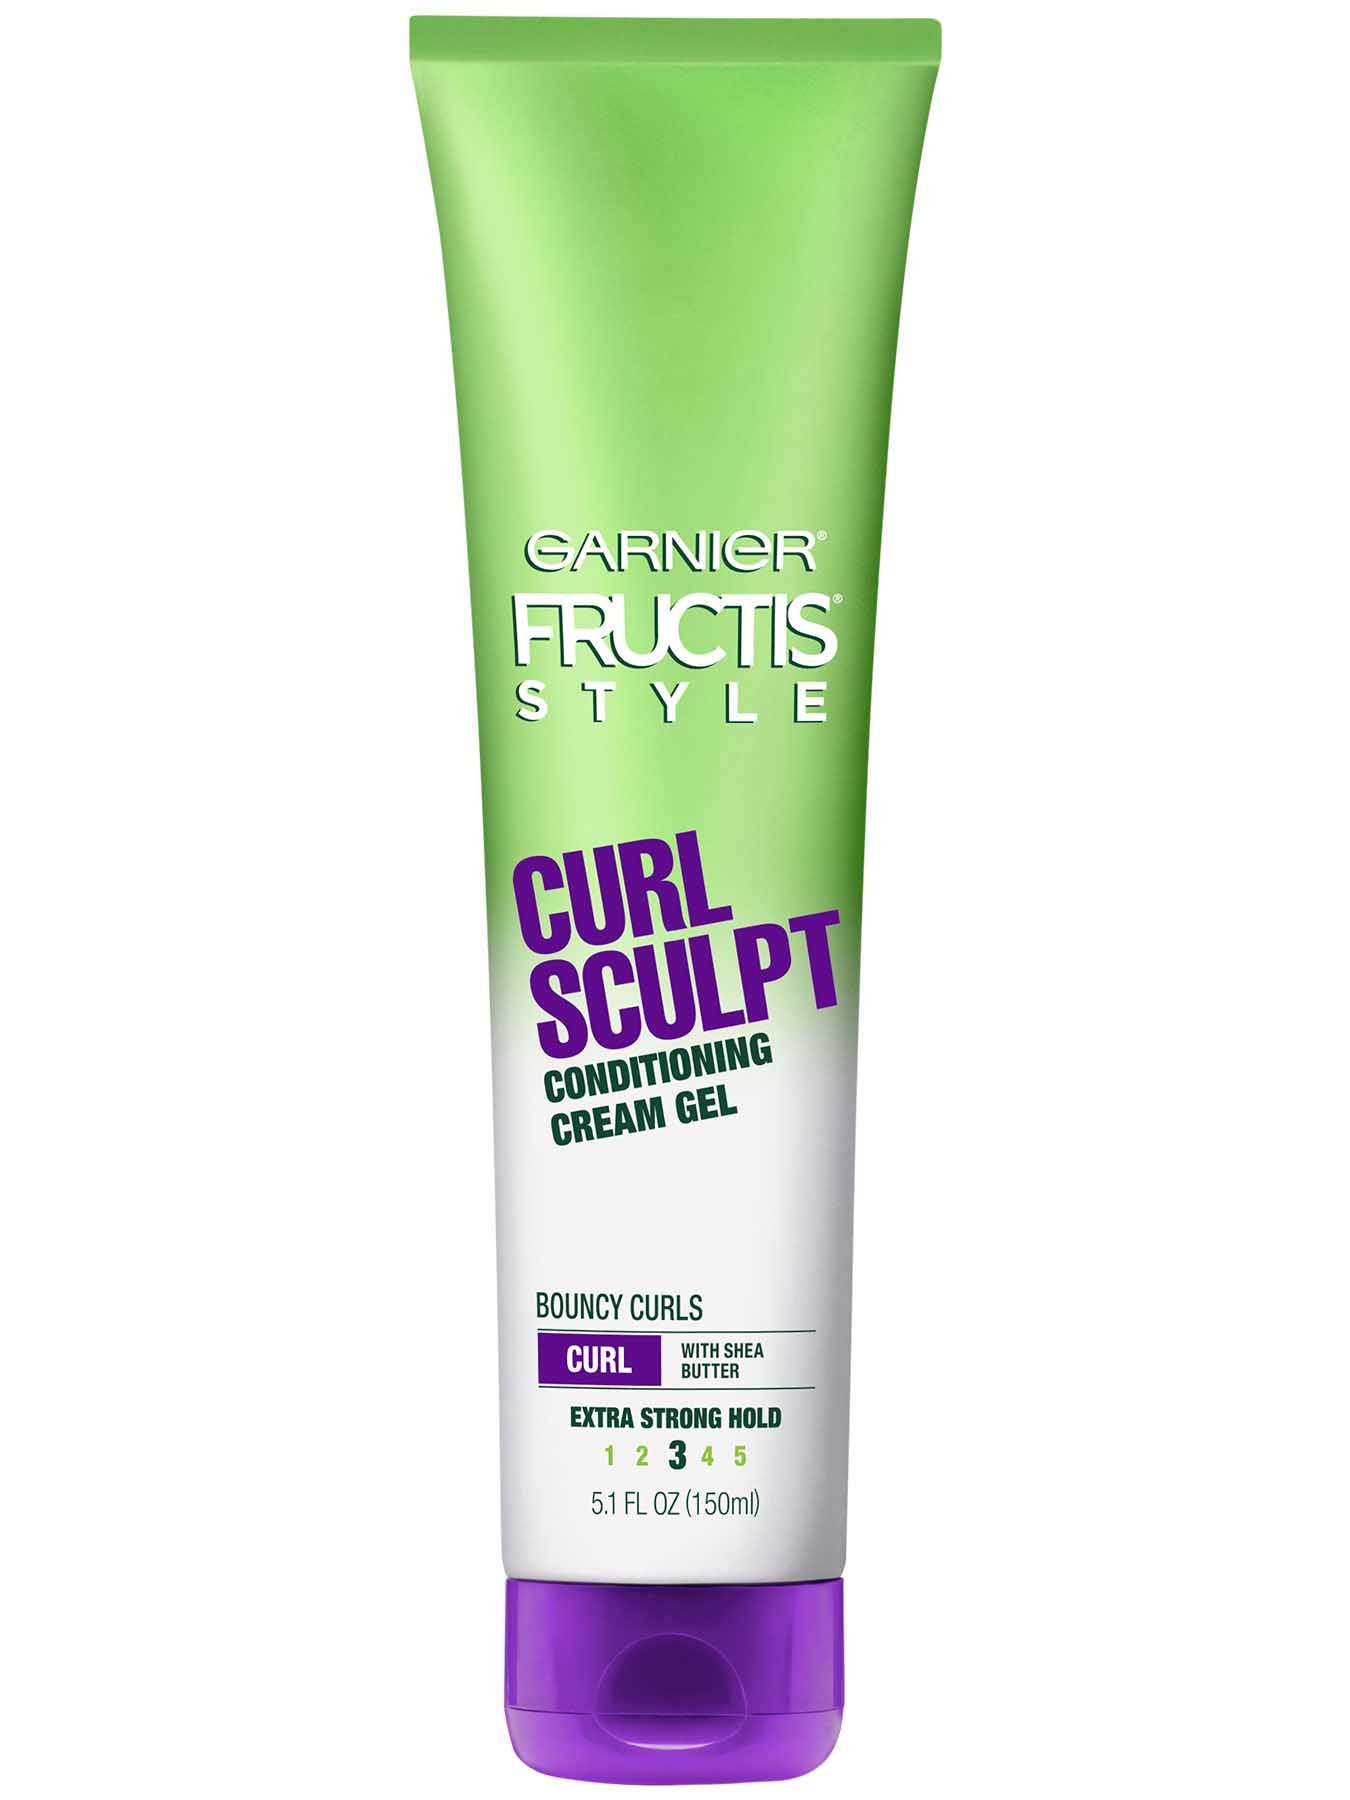 Front view of Curl Sculpt Conditioning Cream Gel.